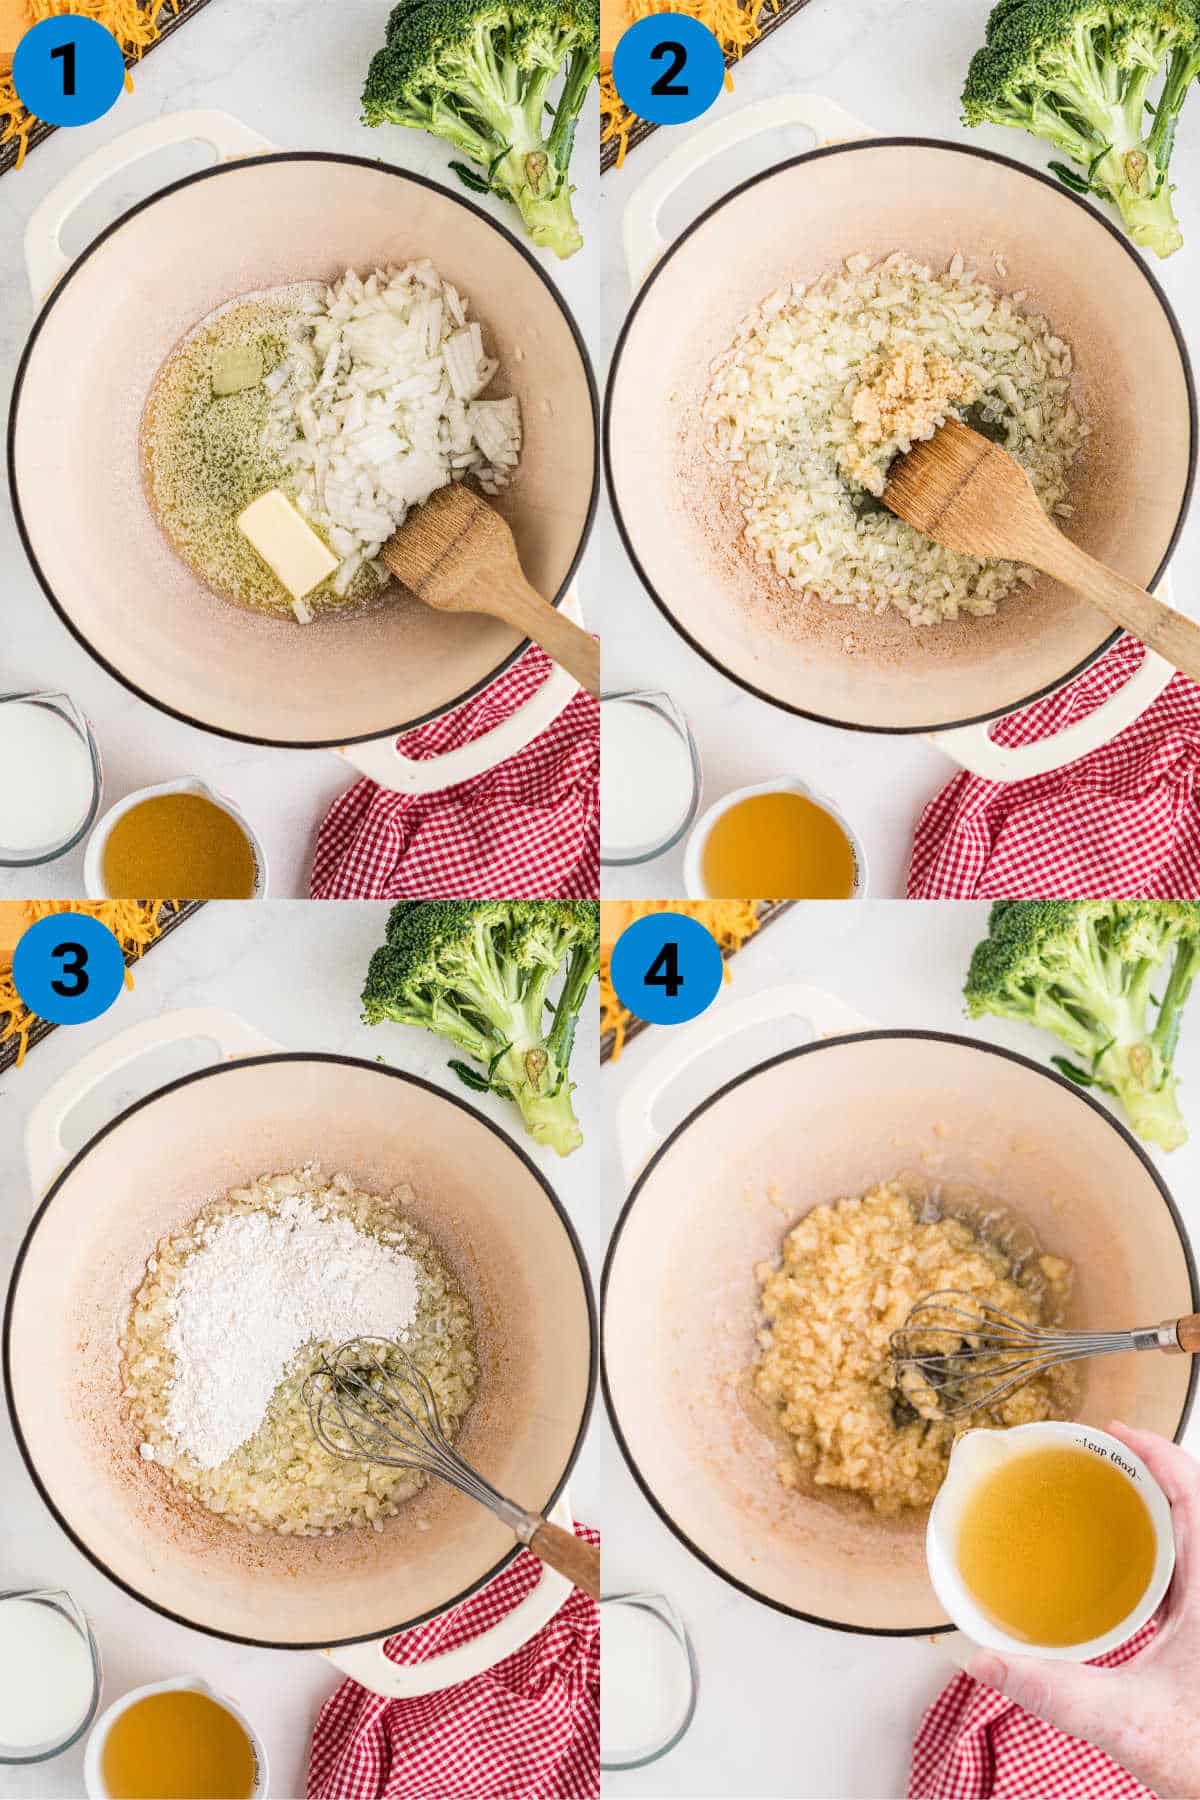 A collage of four images showing how to make a broccoli cheddar soup.